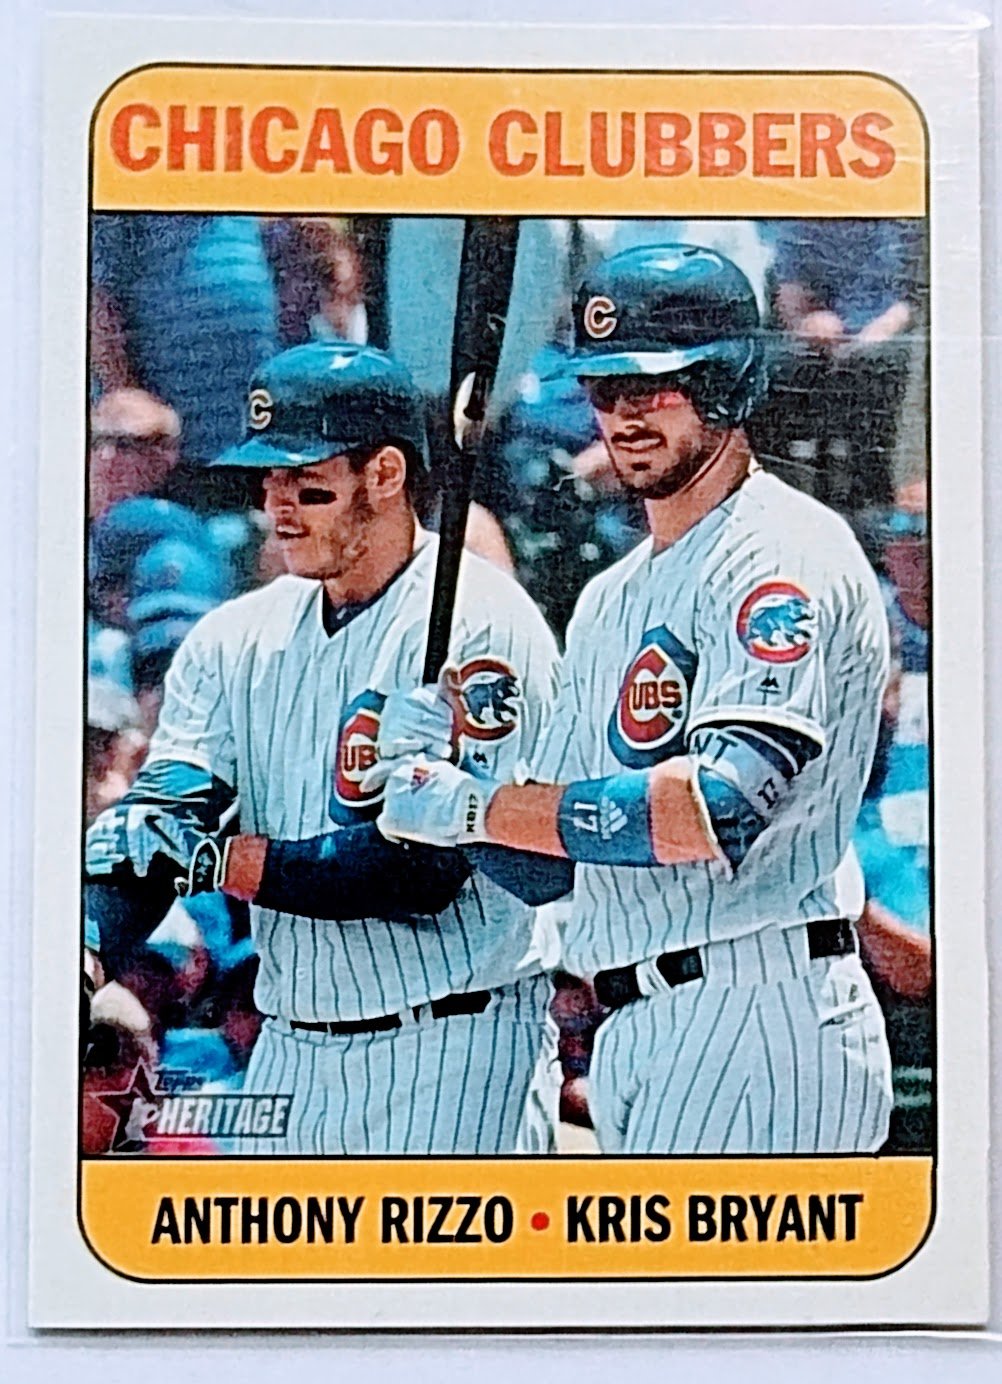 2018 Topps Heritage Anthony Rizzo & Kris Bryant Chicago Clubbers Inser